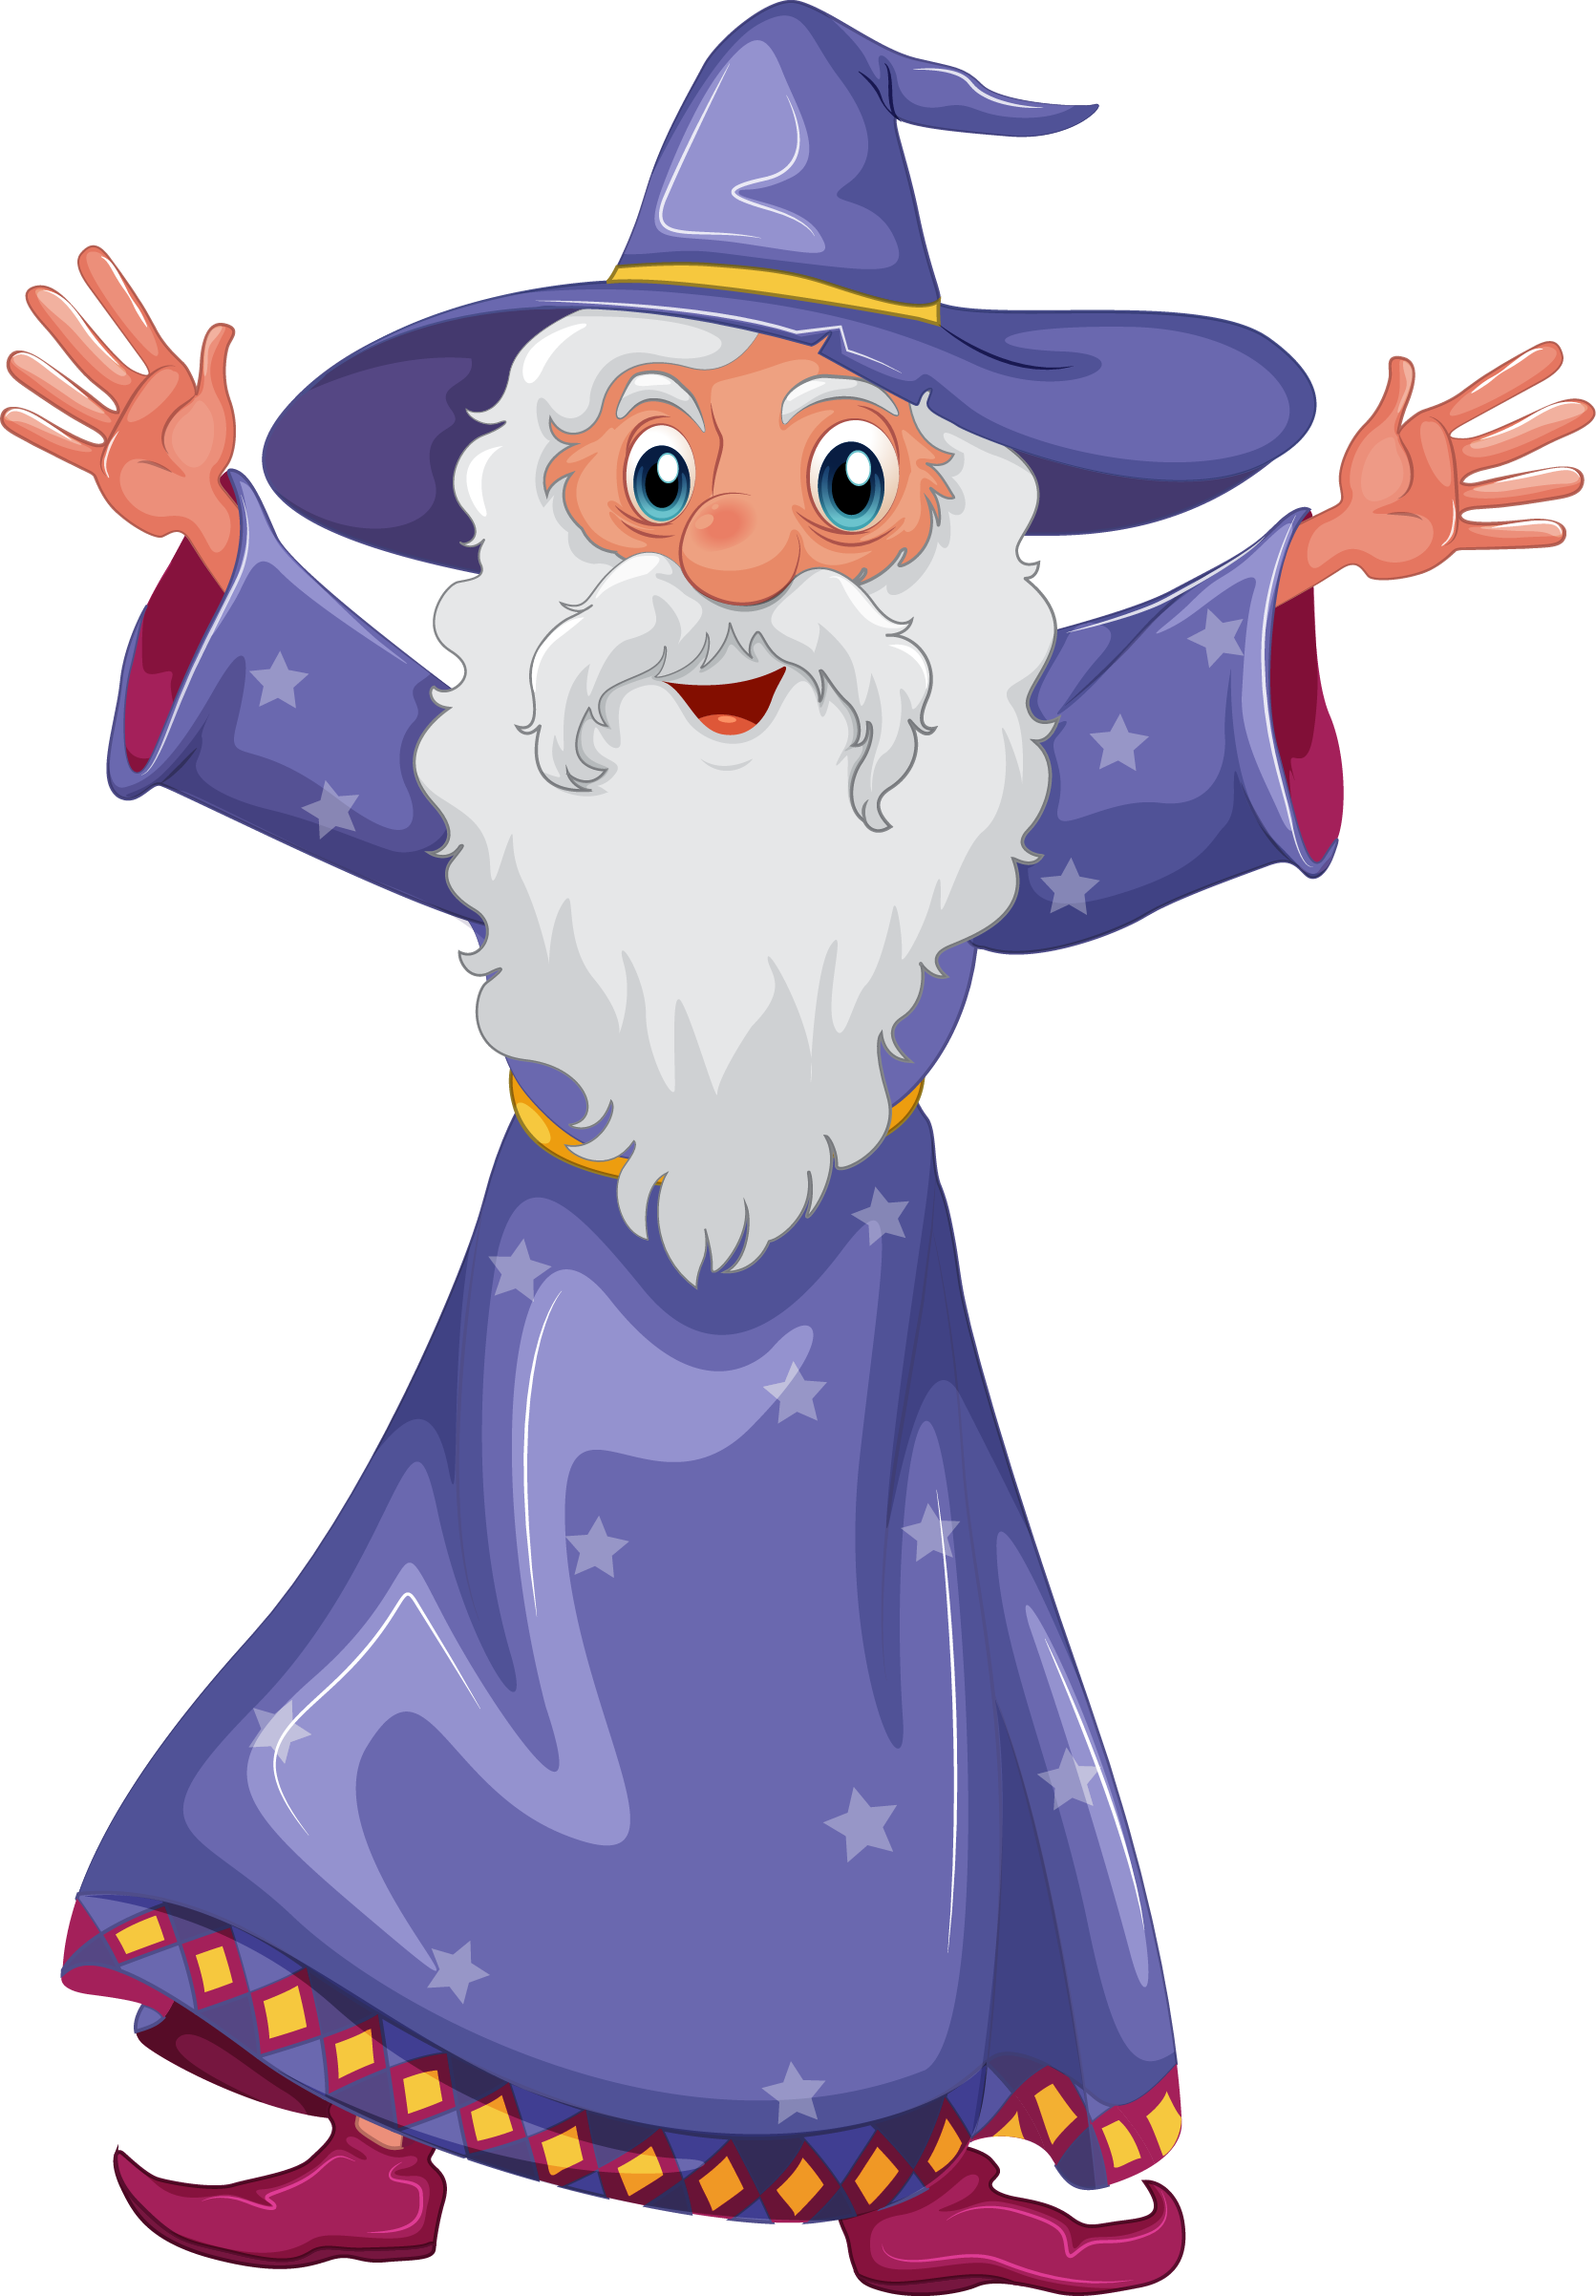 Wizard Vector PNG HD Quality